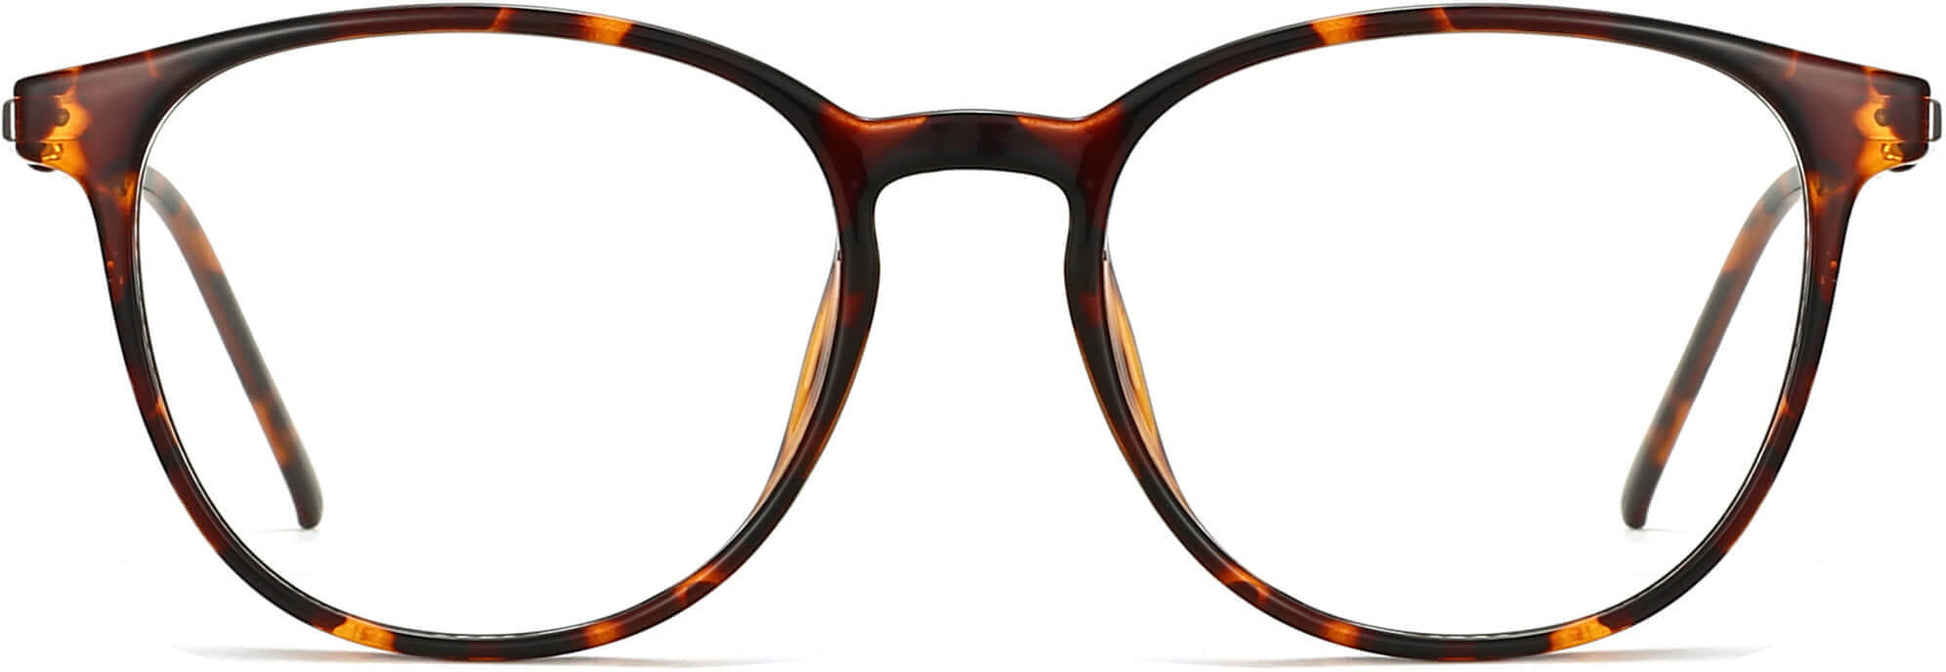 Clementine Round Tortoise Eyeglasses from ANRRI, front view